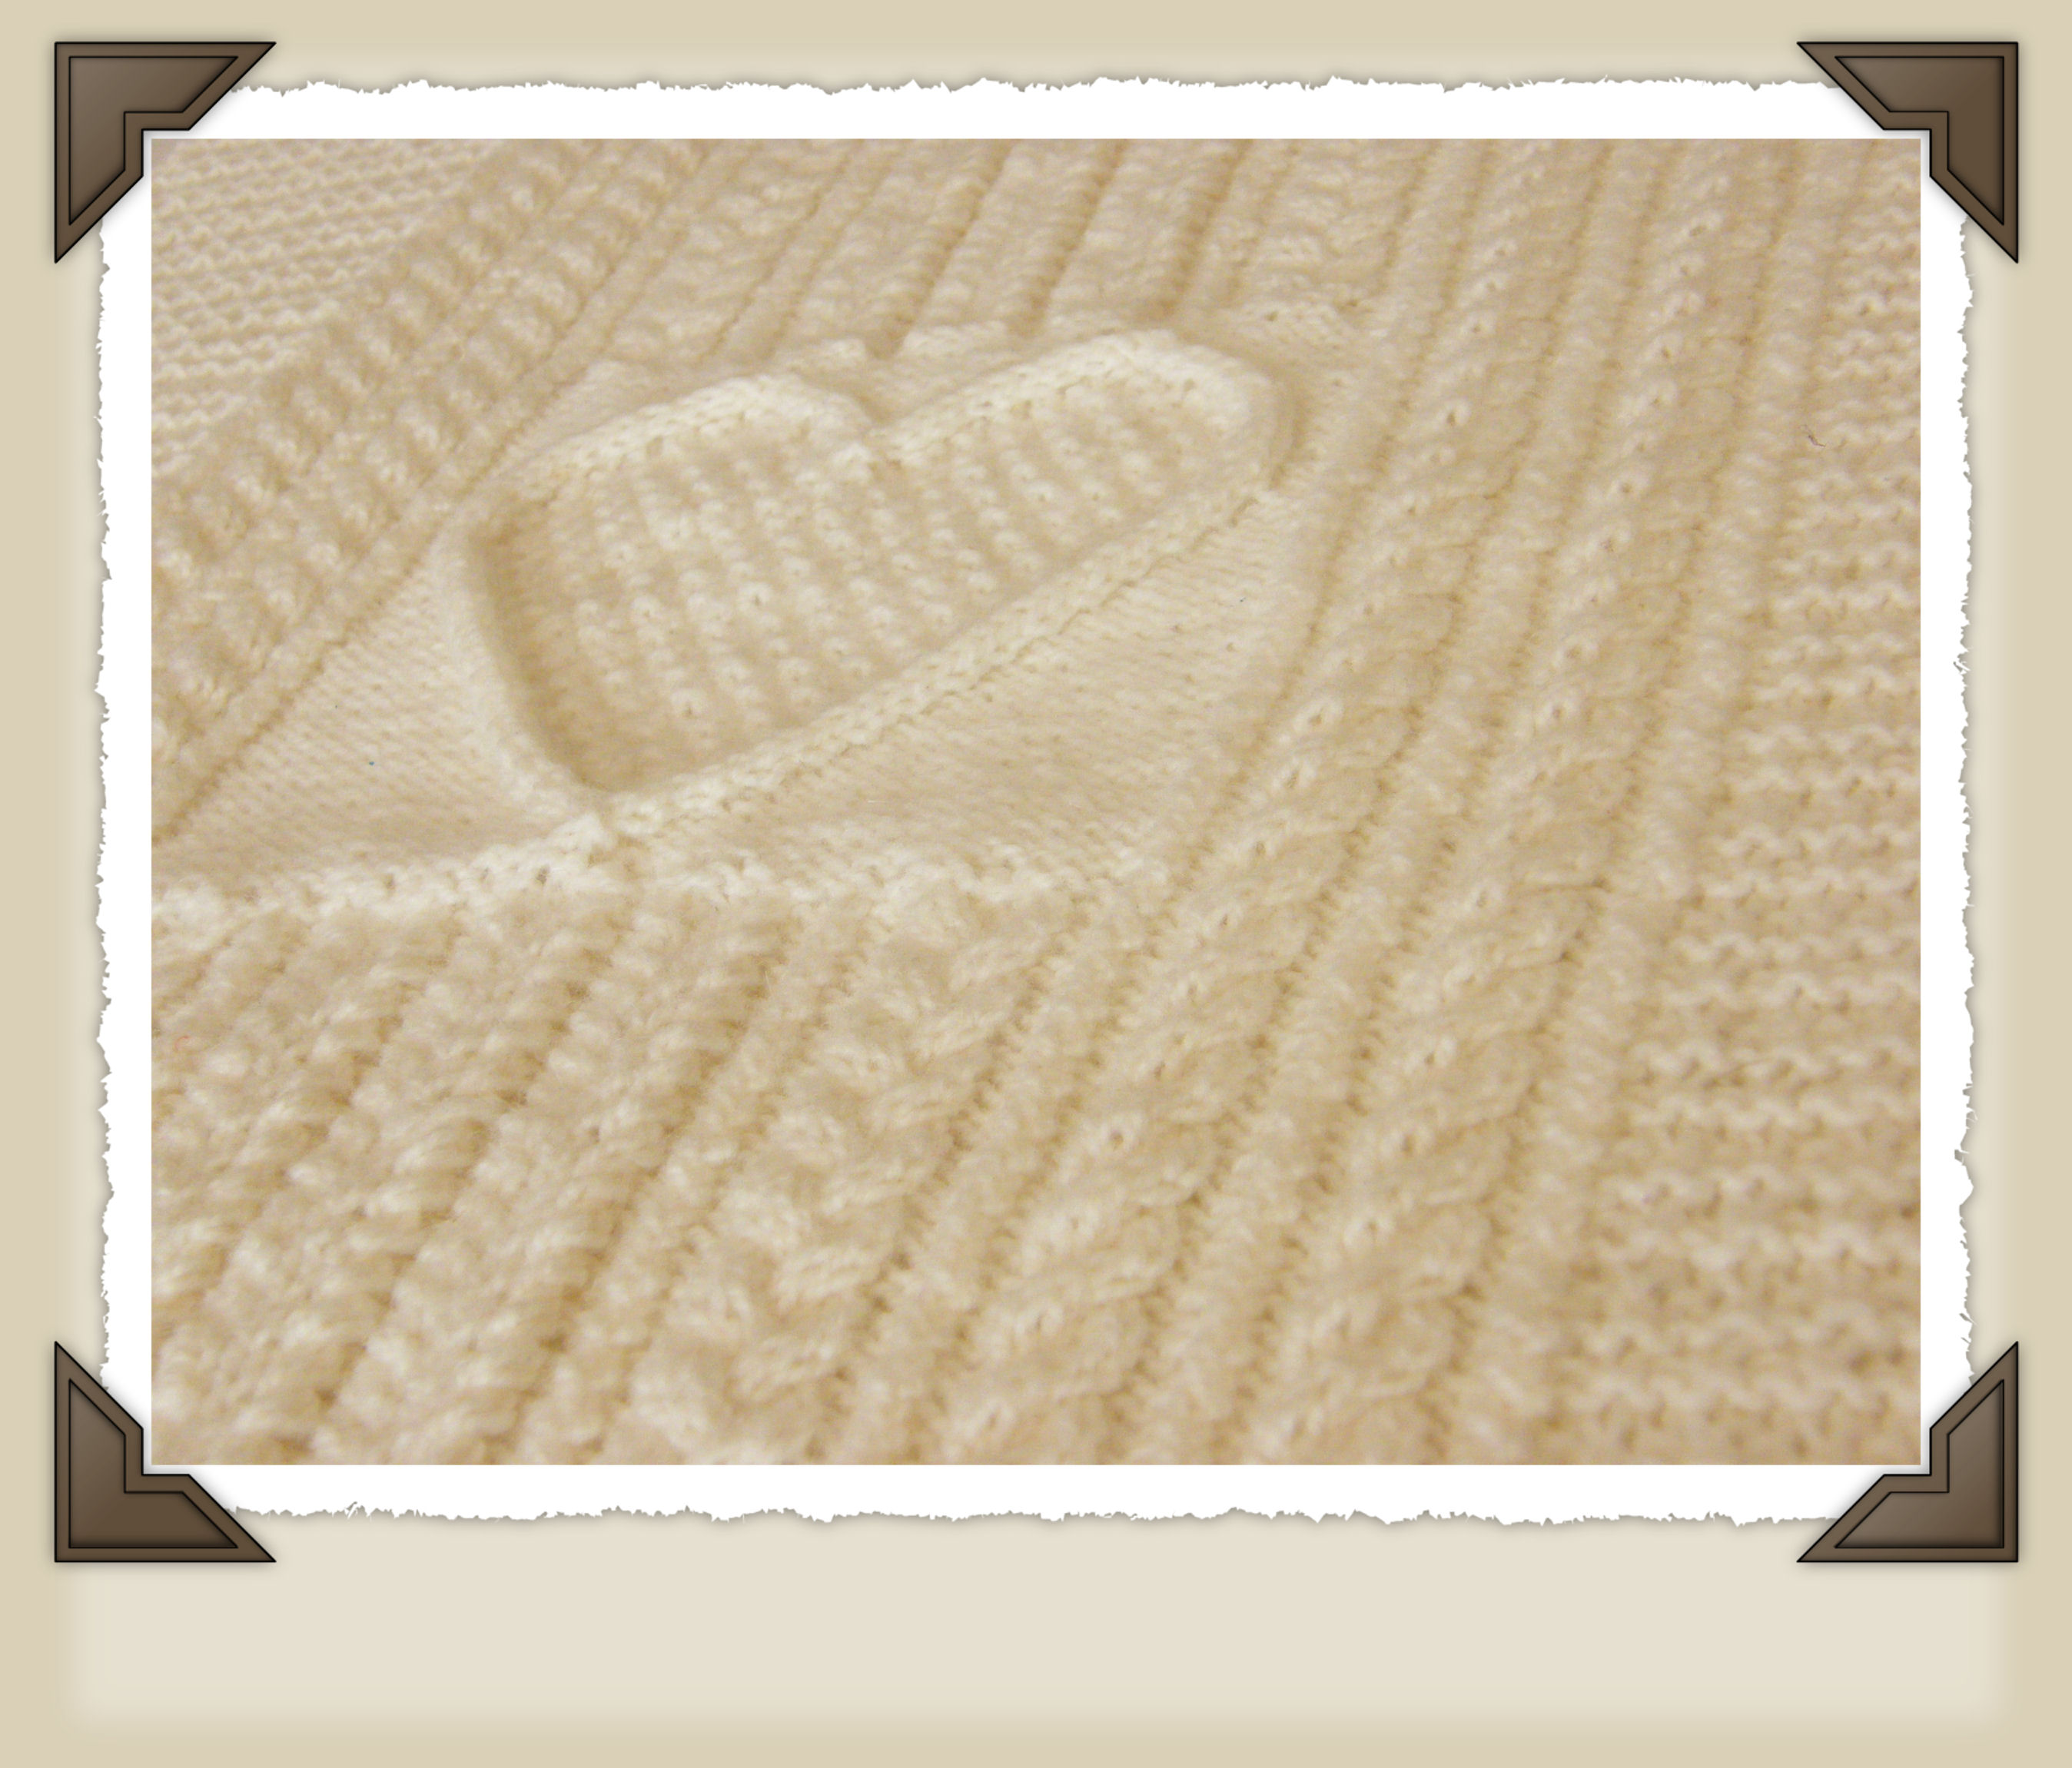 Blanket Cable Knit - Compare Prices, Reviews and Buy at Nextag